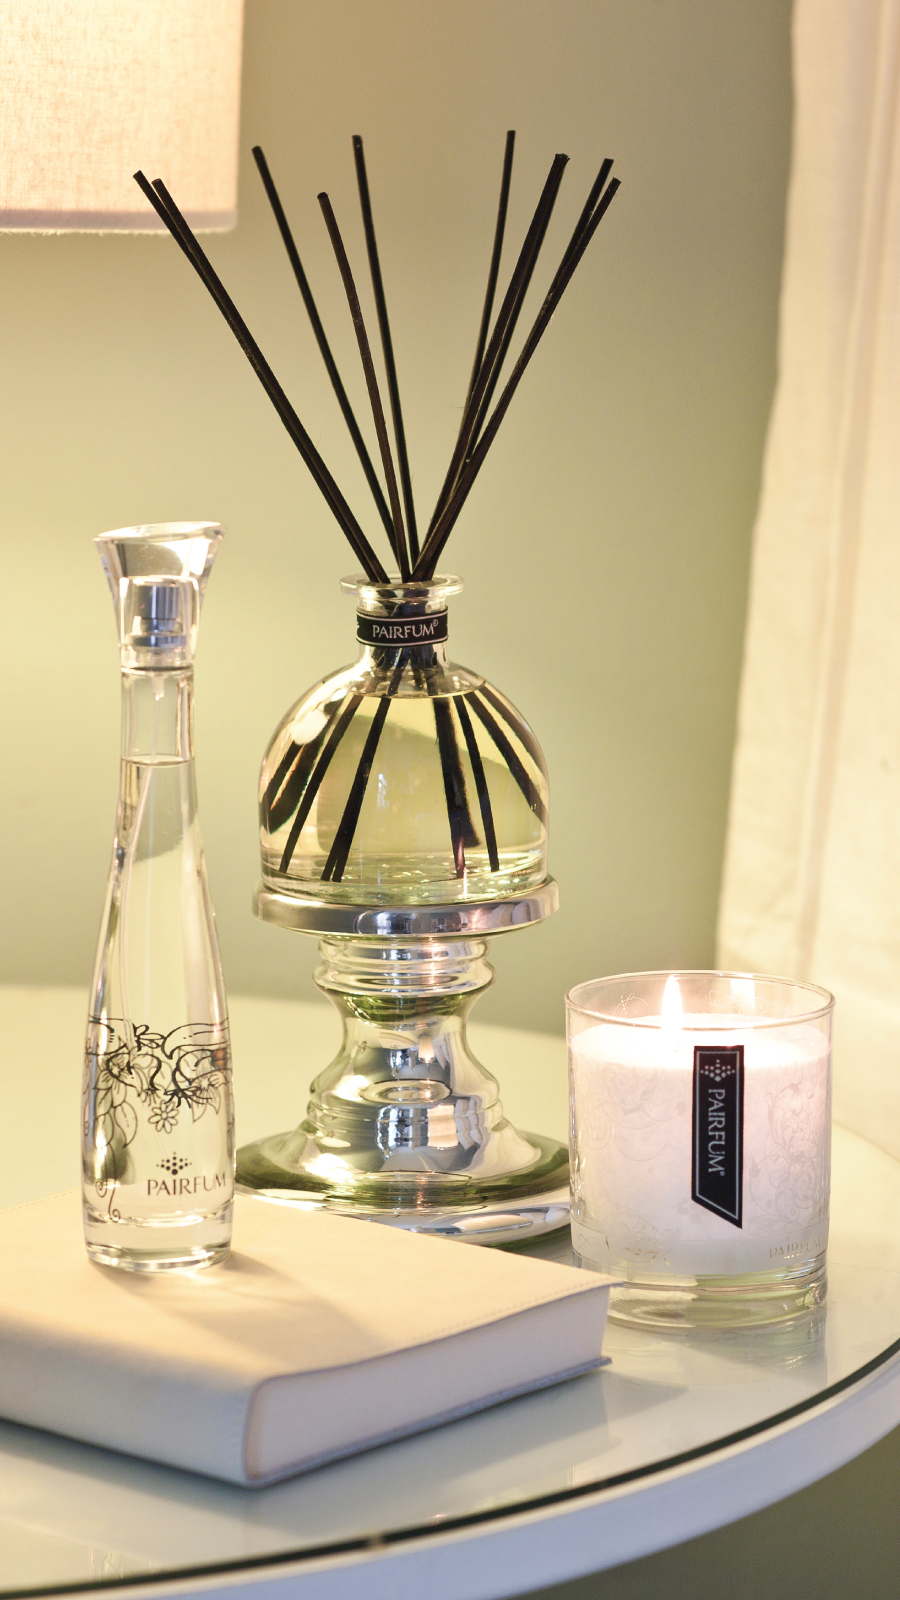 Lifestyle Bedroom Reed Diffuser Room Spray Perfume Candle 9 16